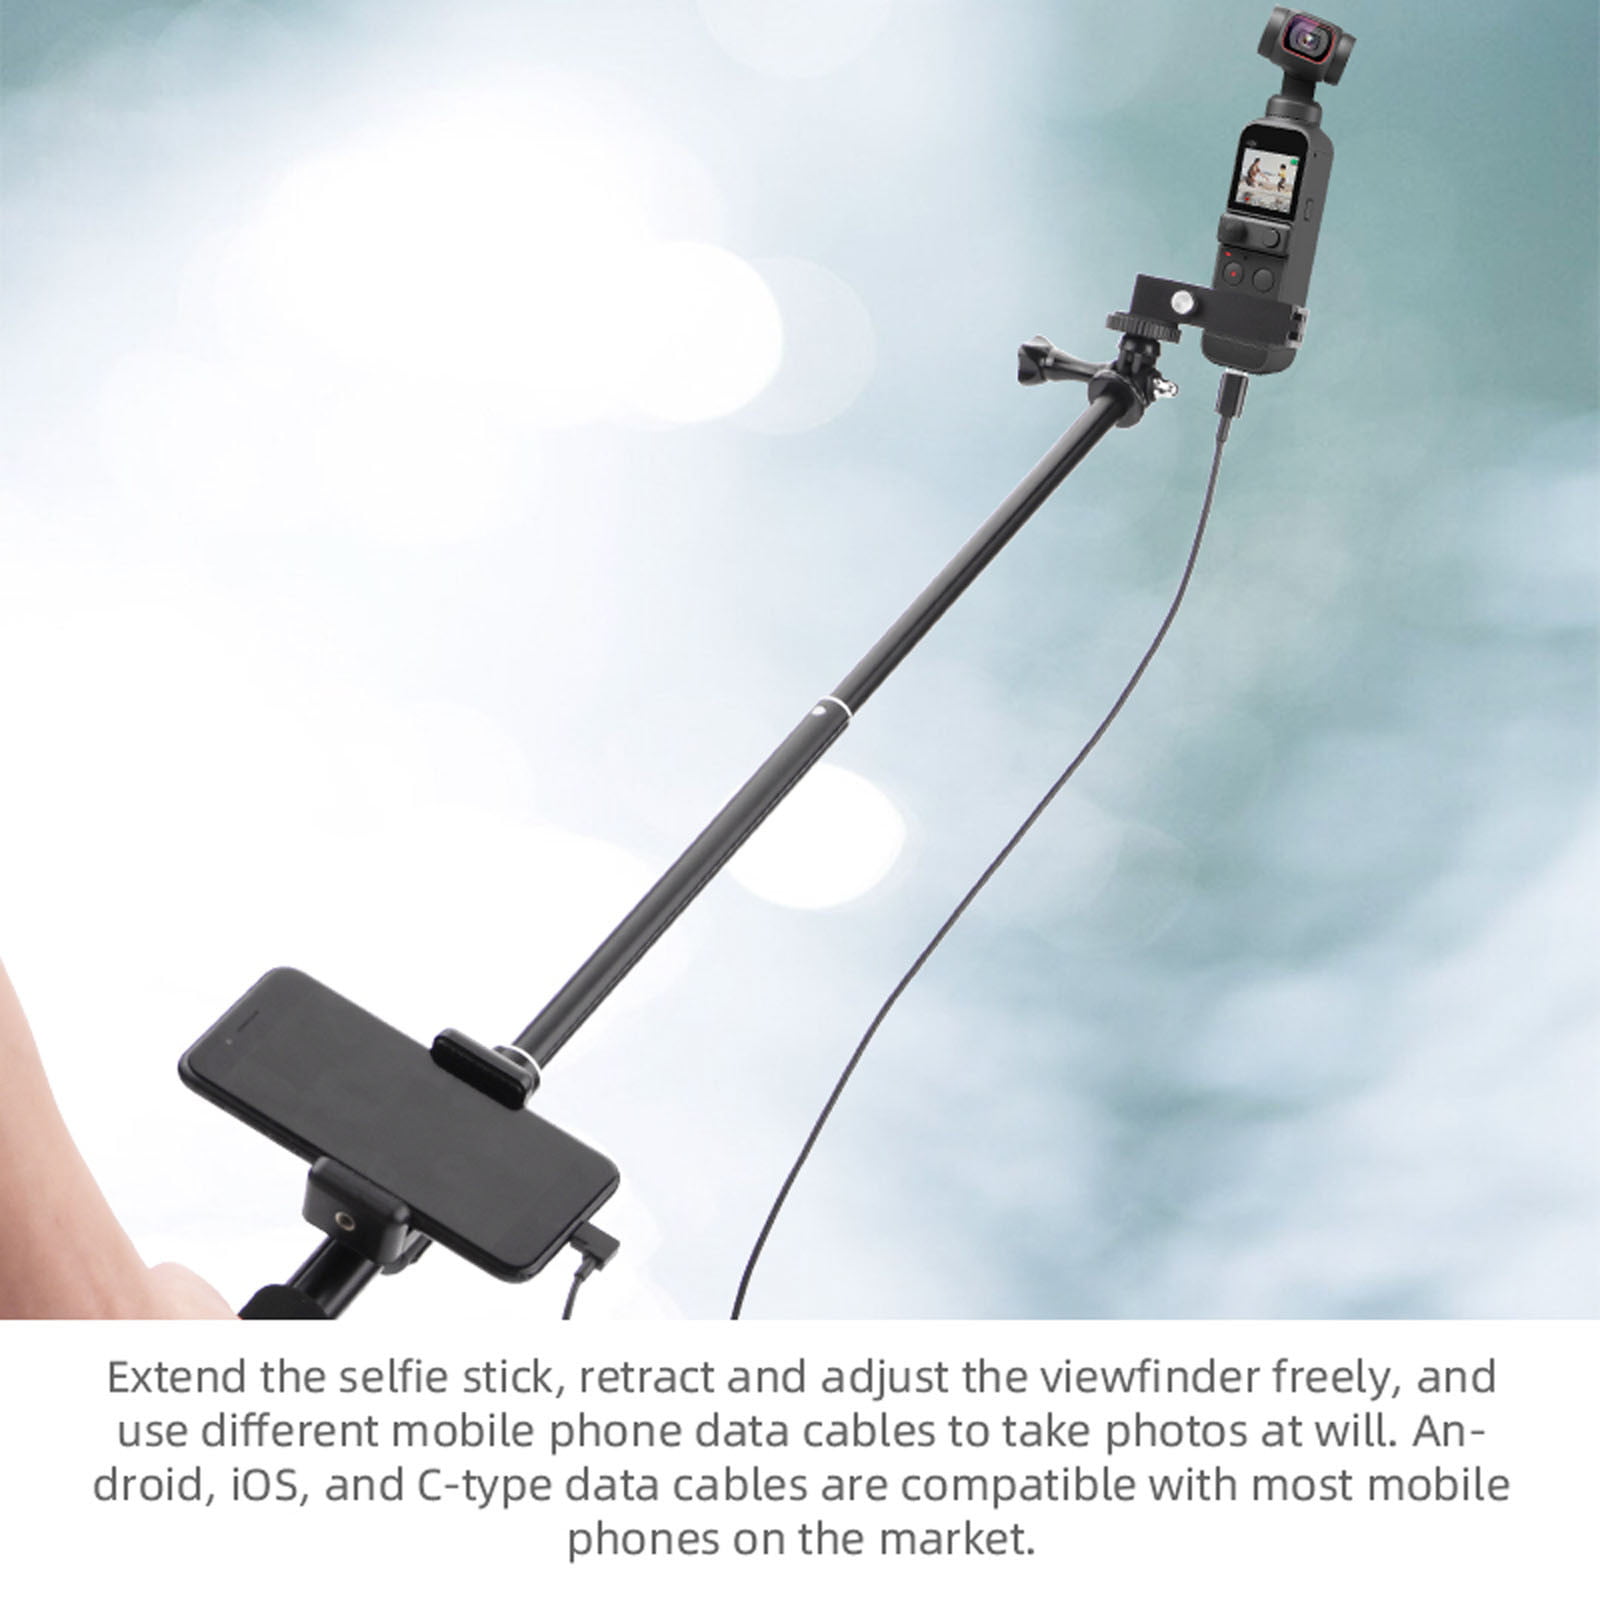 Mandalaa Selfie Stick for DJI OSMO Pocket Gimbal Stabilizer Cable for iOS Phone 